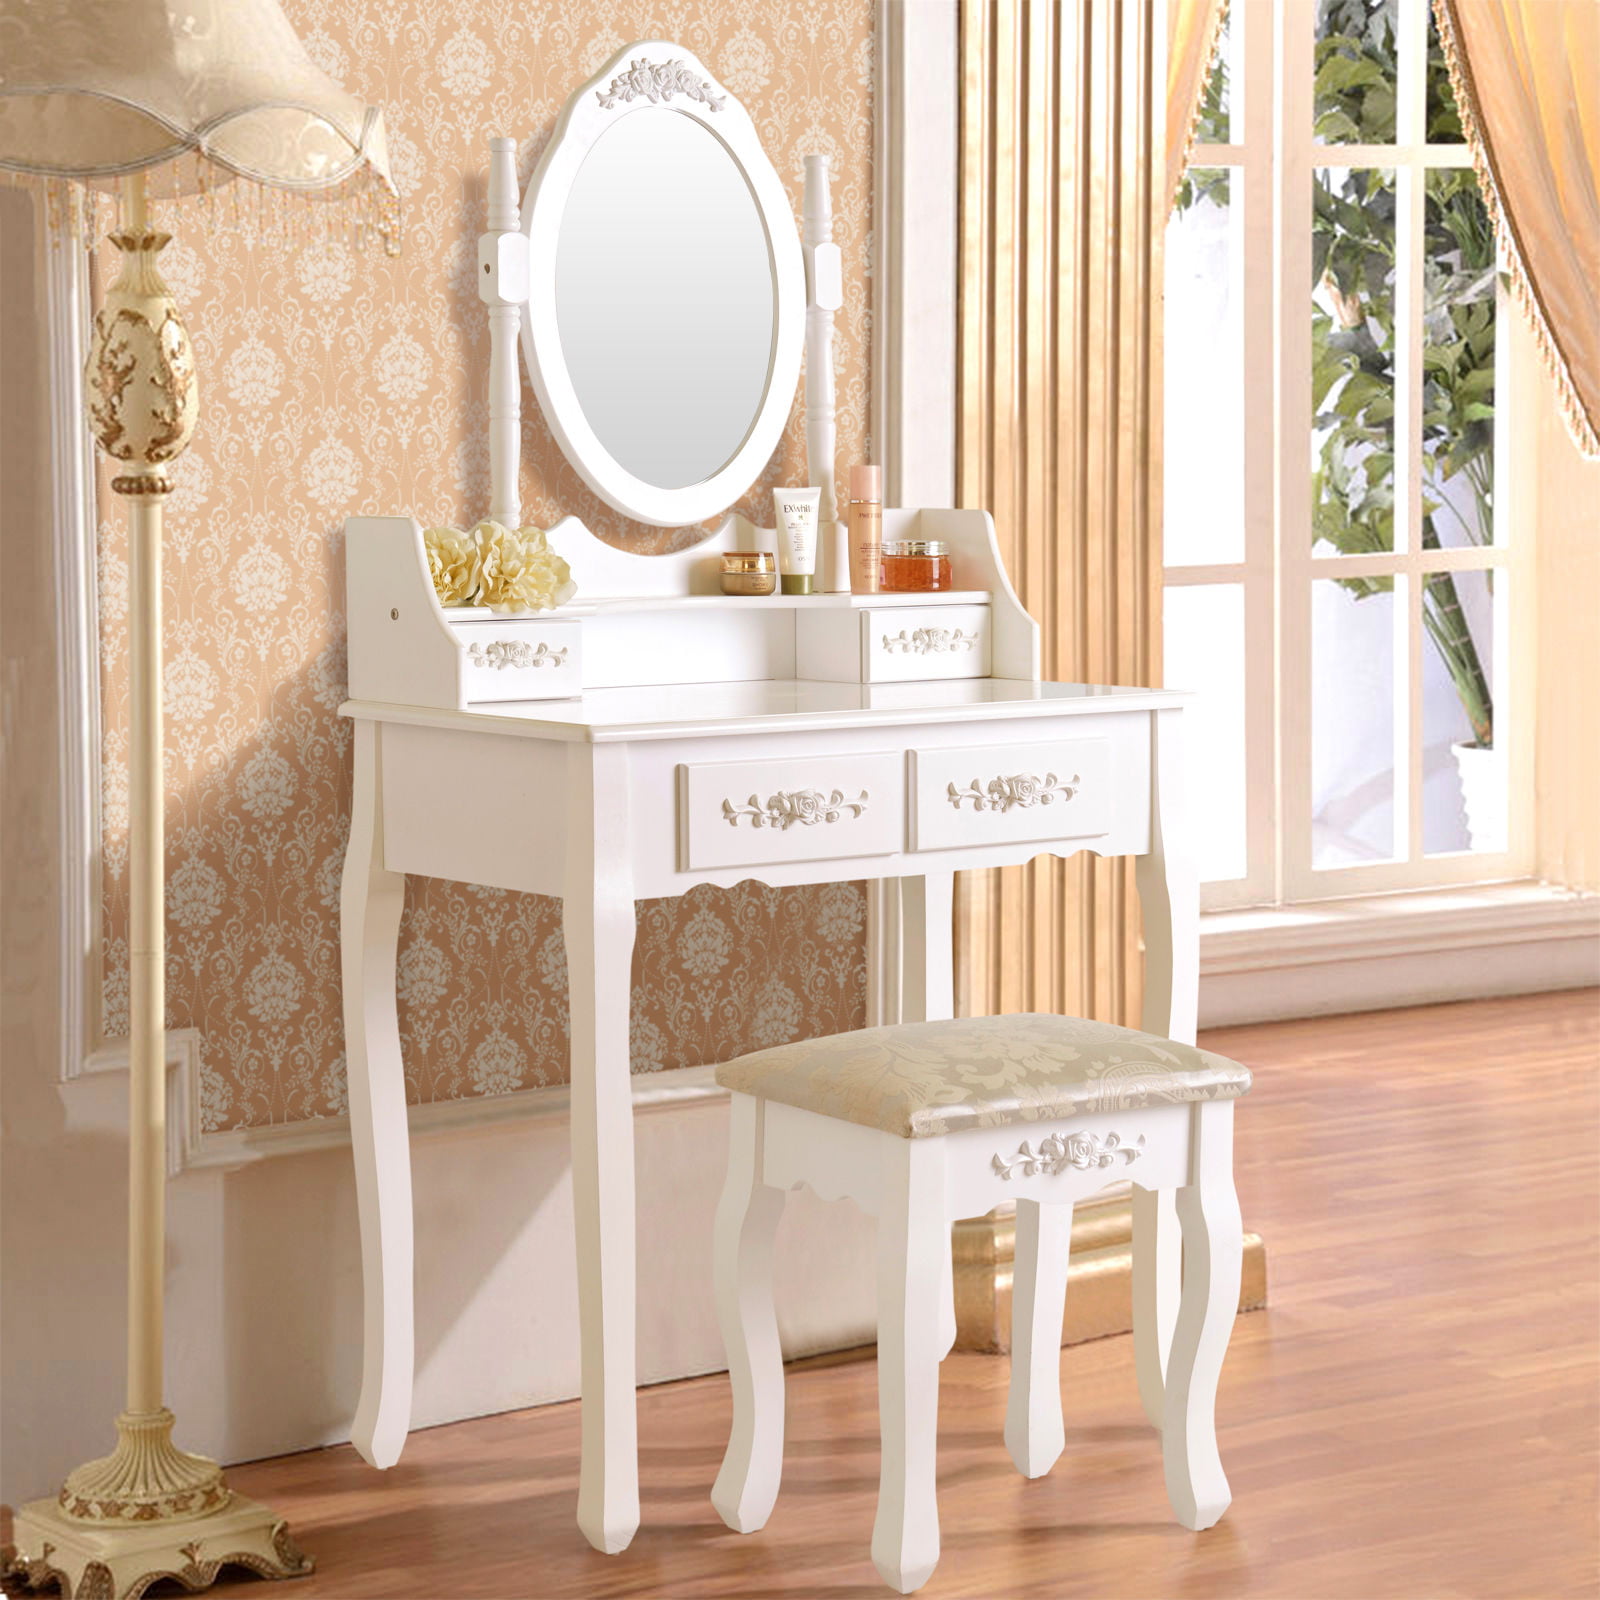 White mecor Dressing Tables with Stool Vanity Table Set wirh 3 Mirrors Makeup Dressing Table for Bedroom Drssing Tables Set with 4 Drawers